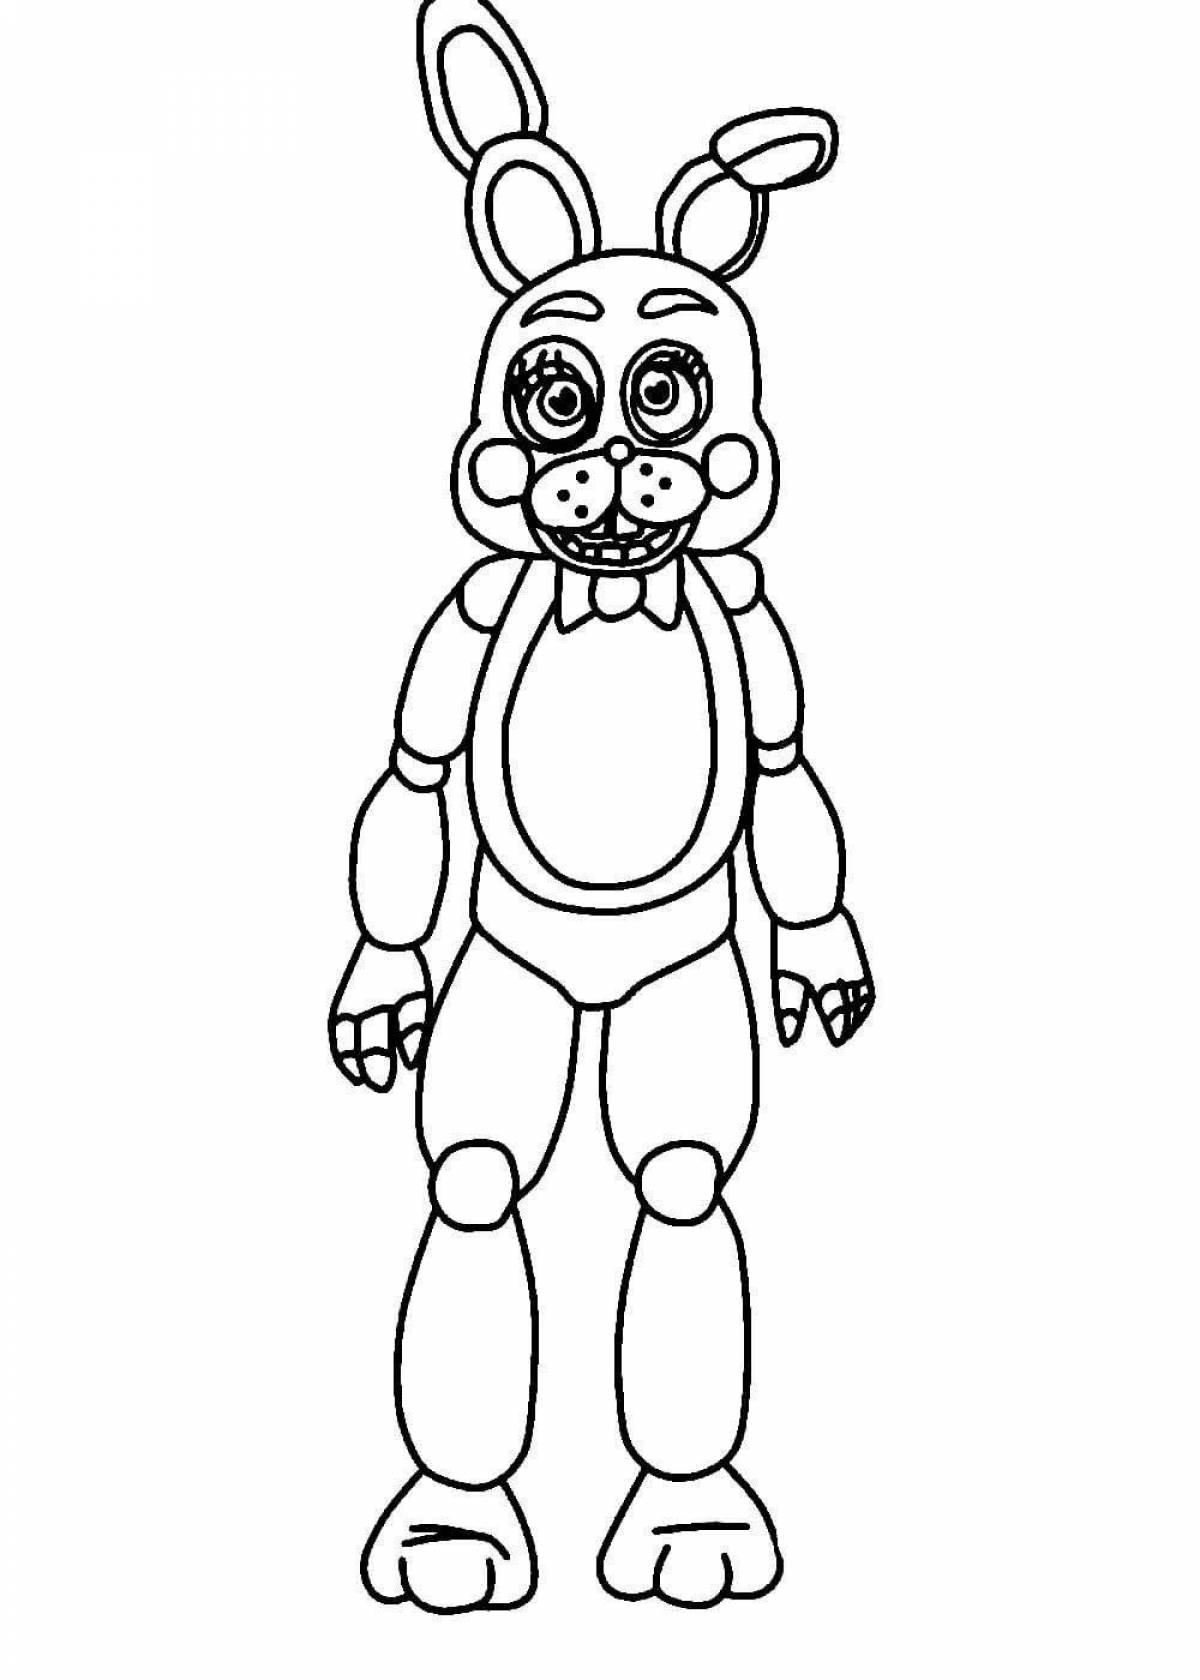 Fnaf inspiration coloring by numbers